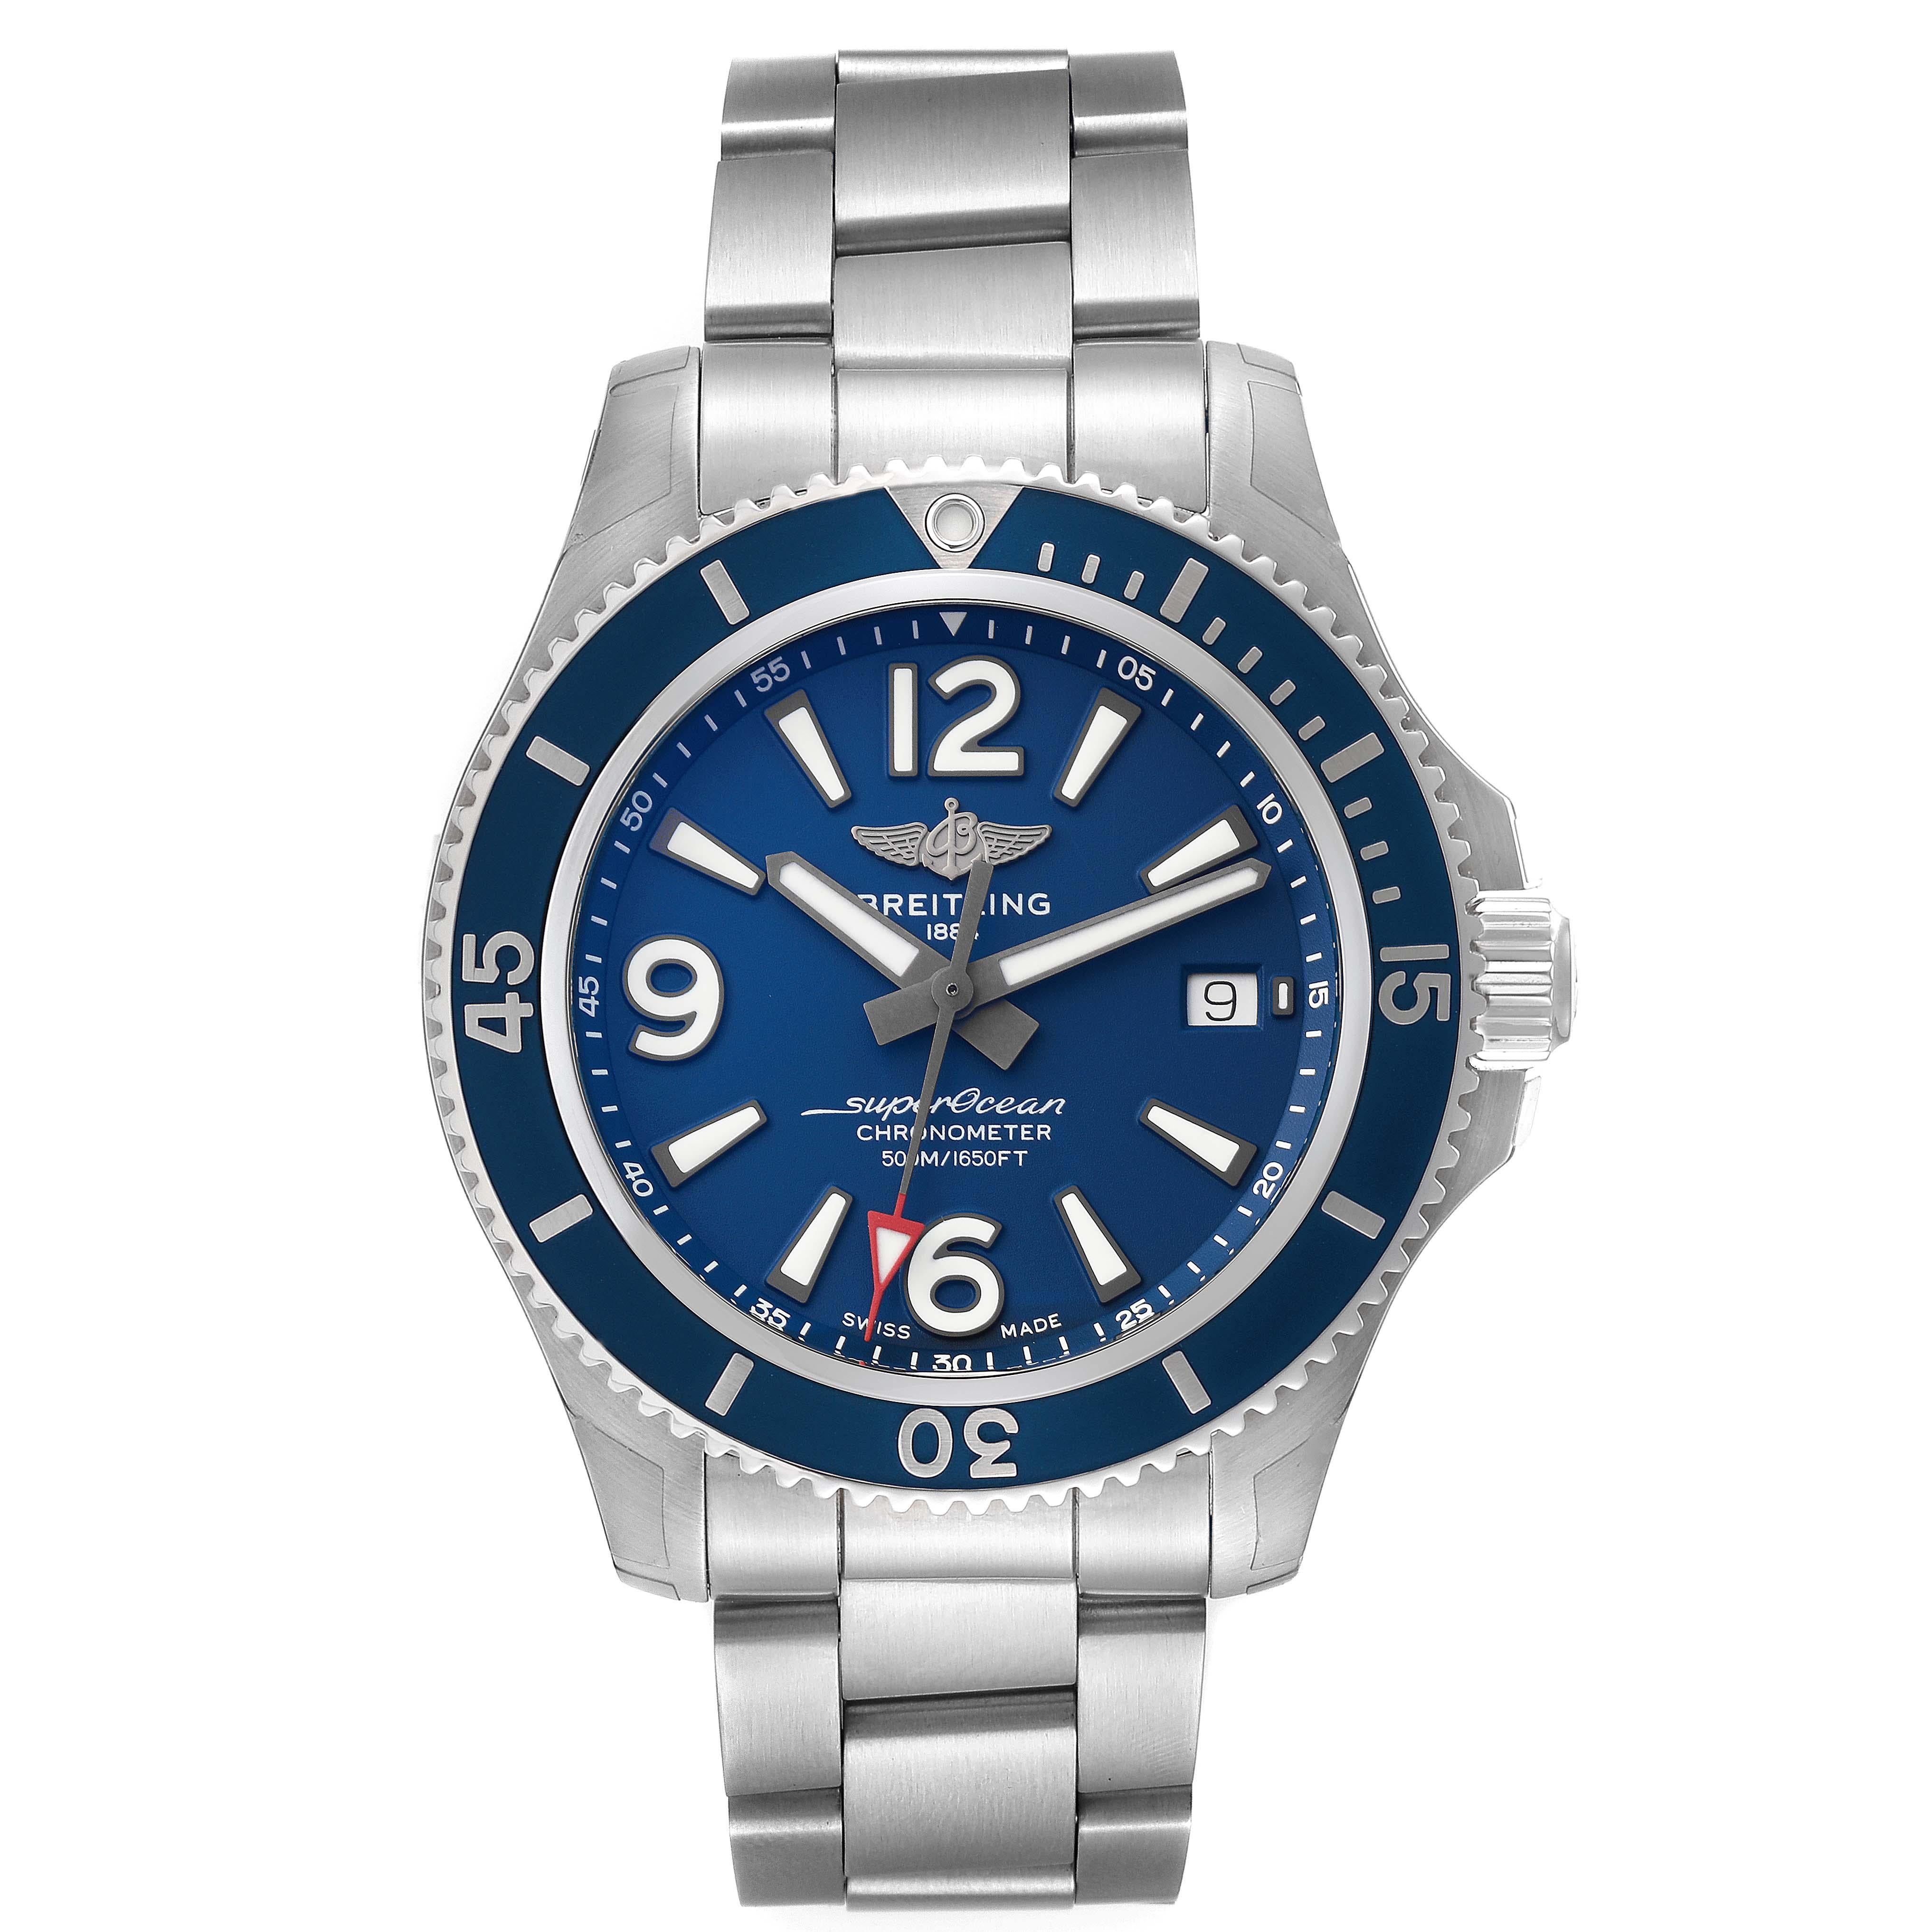 Breitling Superocean 42 Blue Dial Steel Mens Watch A17366 Unworn. Automatic self-winding movement. Stainless steel case 42.0 mm in diameter. Stainless steel screwed-down crown. Blue stainless steel unidirectional revolving bezel. 0-60 elapsed-time.